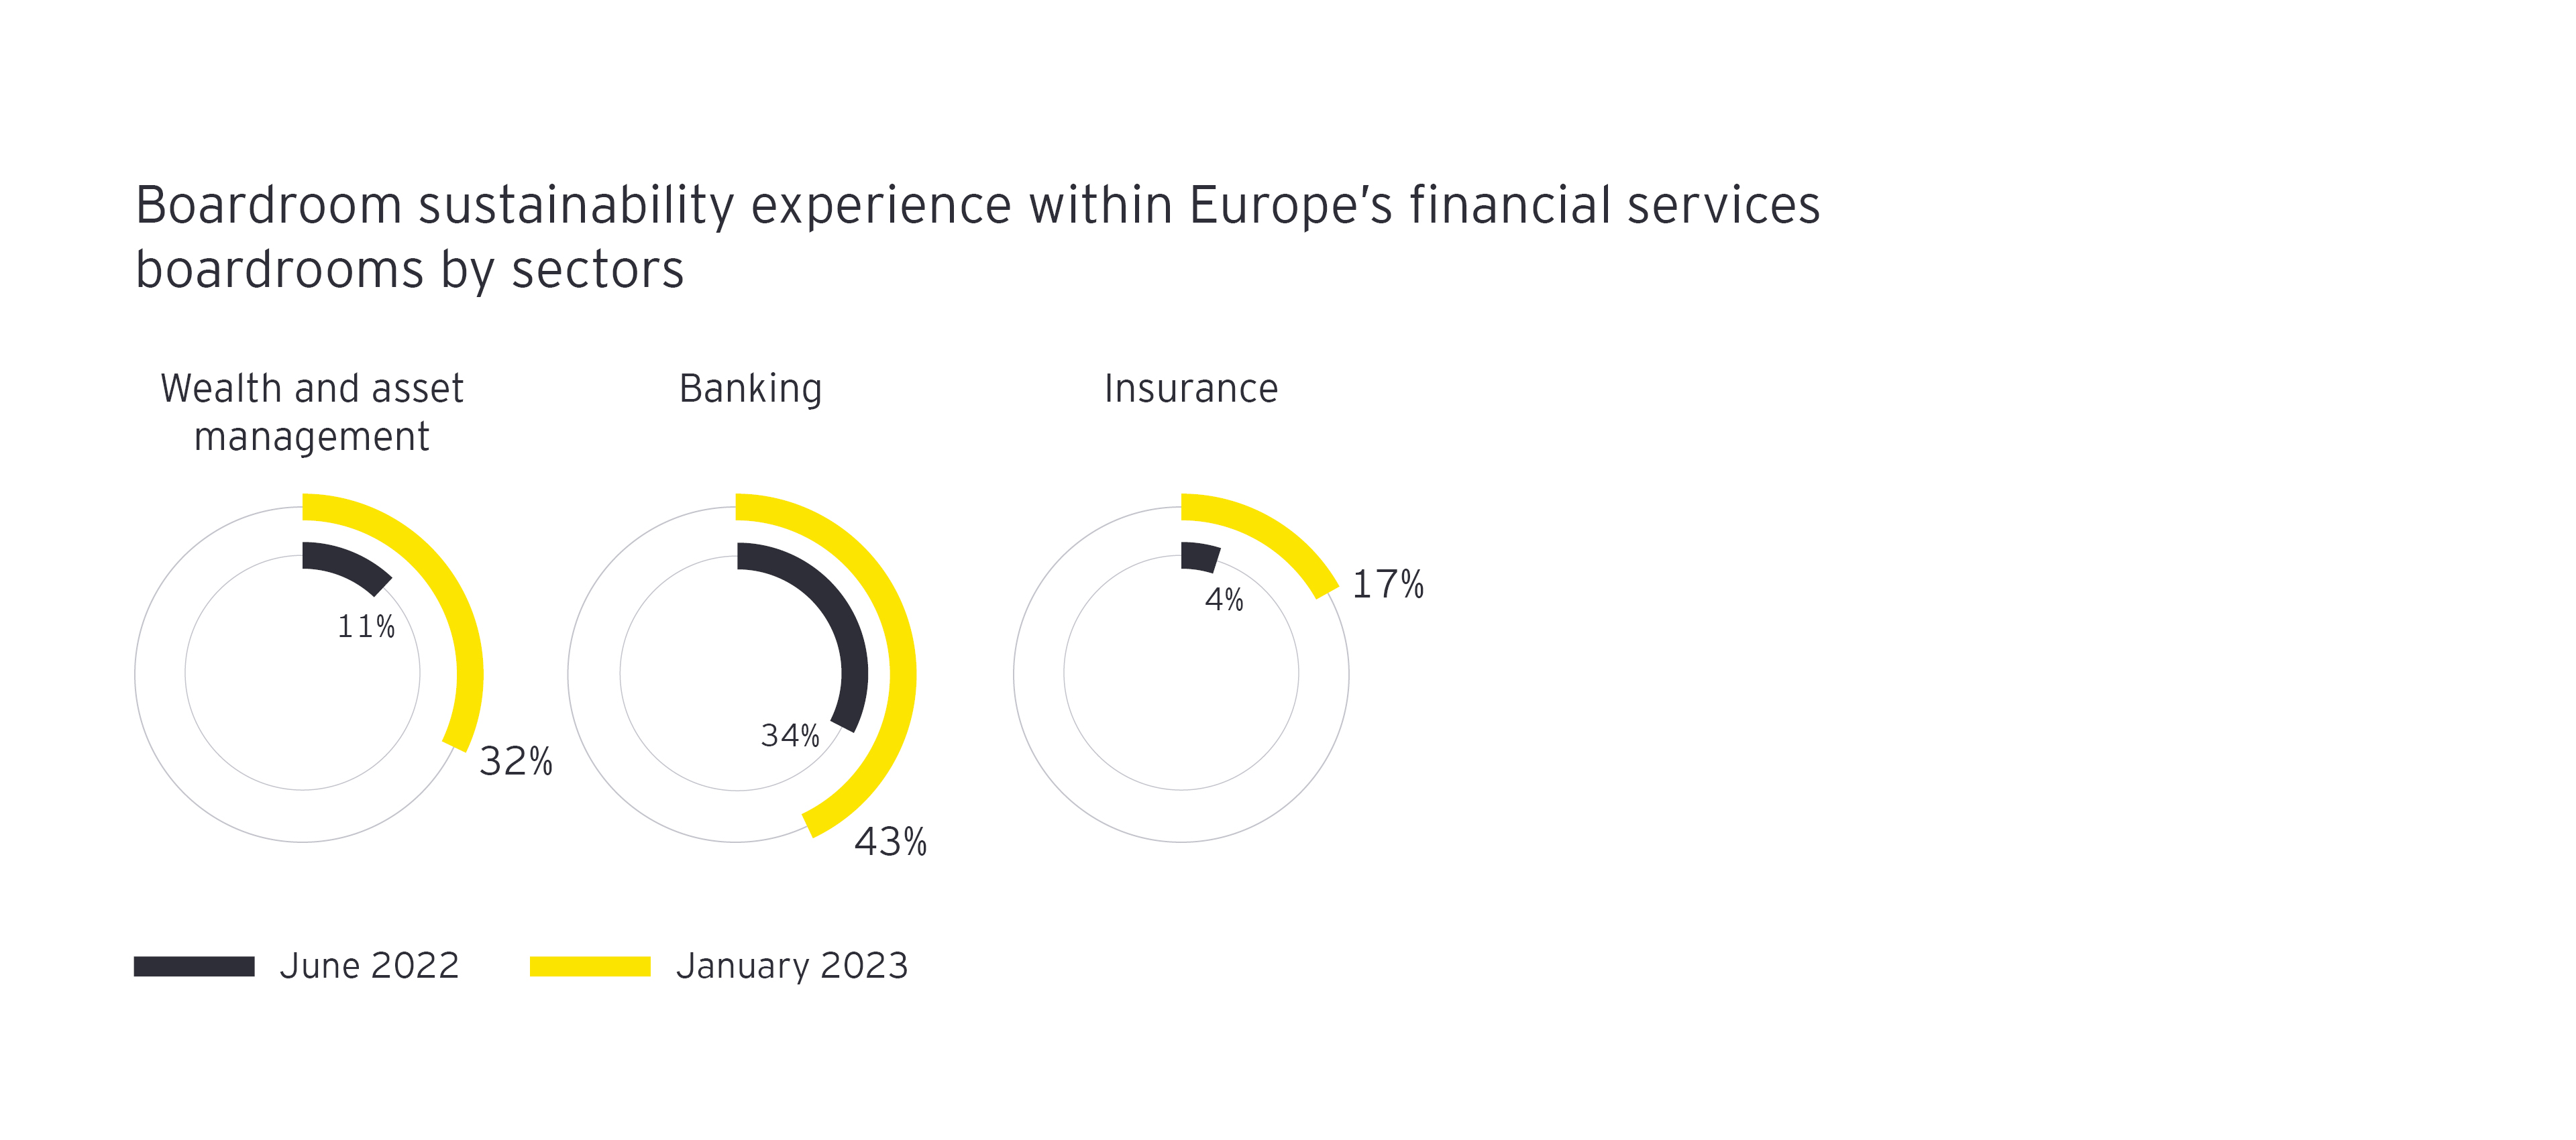 Boardroom sustainability experience within Europe's financial service boardrooms by sector